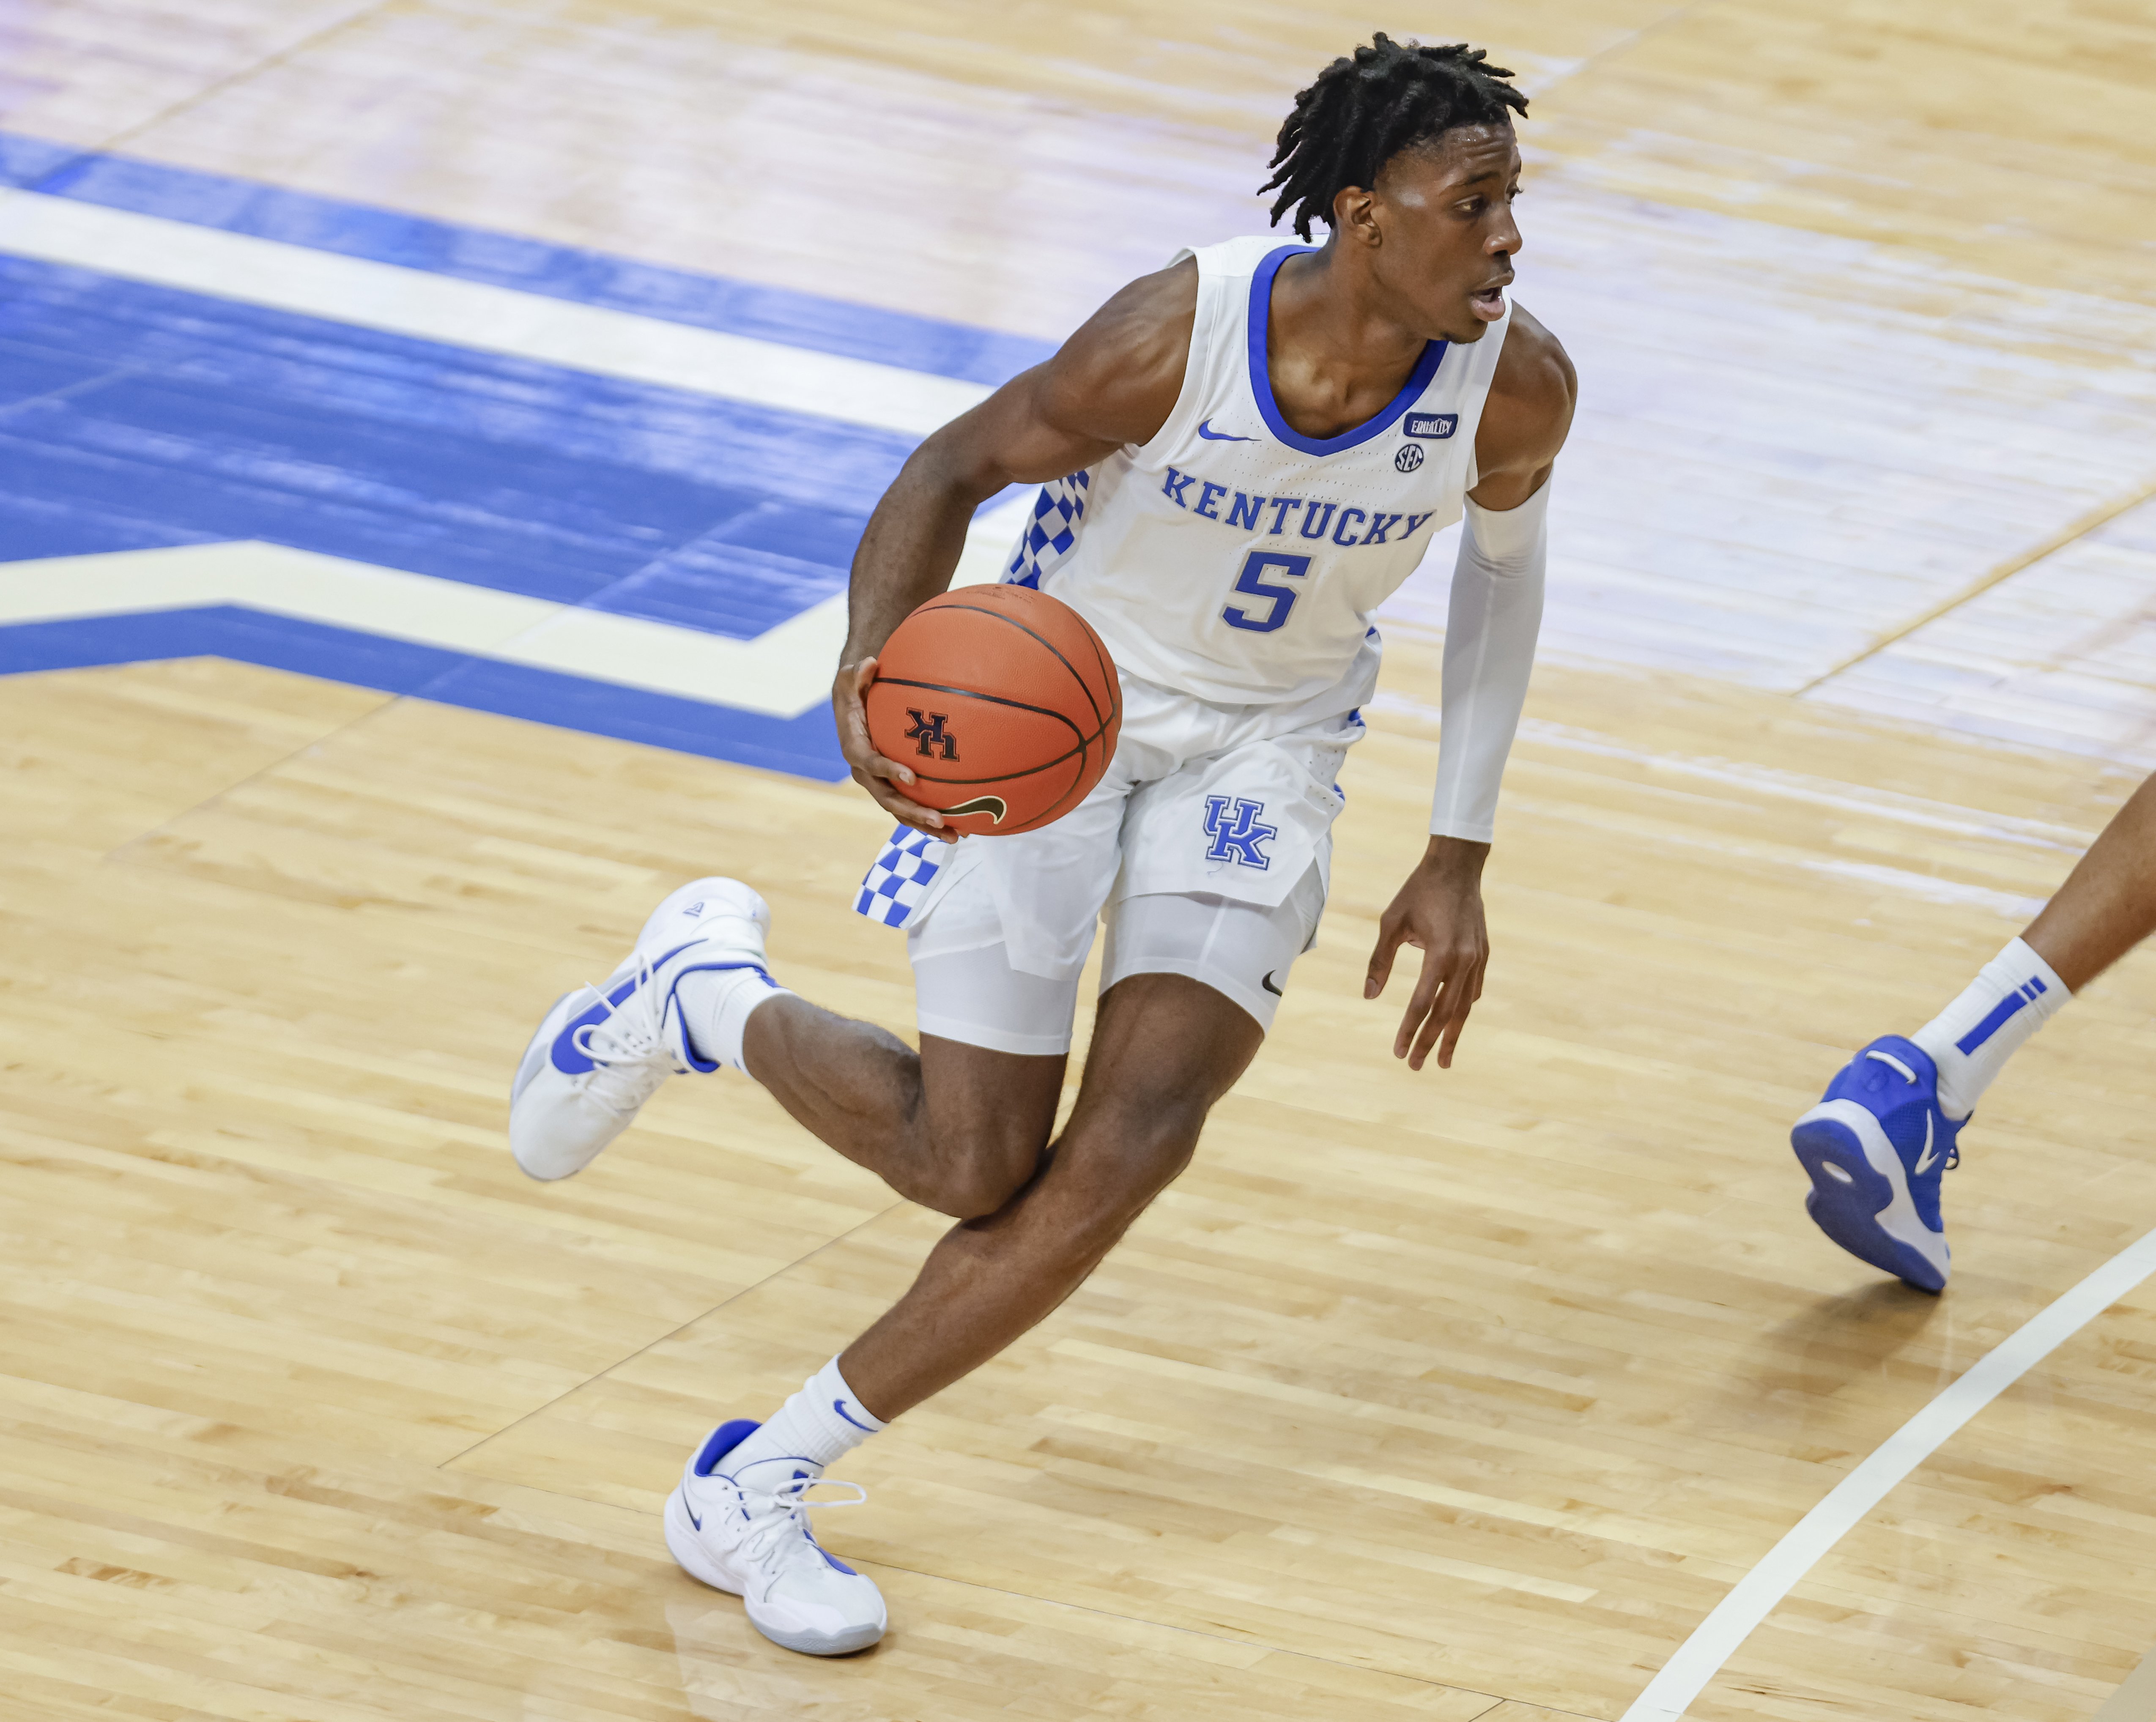 Terrence Clarke #5 of the Kentucky Wildcats plays on the court on December 12, 2020 in Lexington, Kentucky | Photo: Getty Images